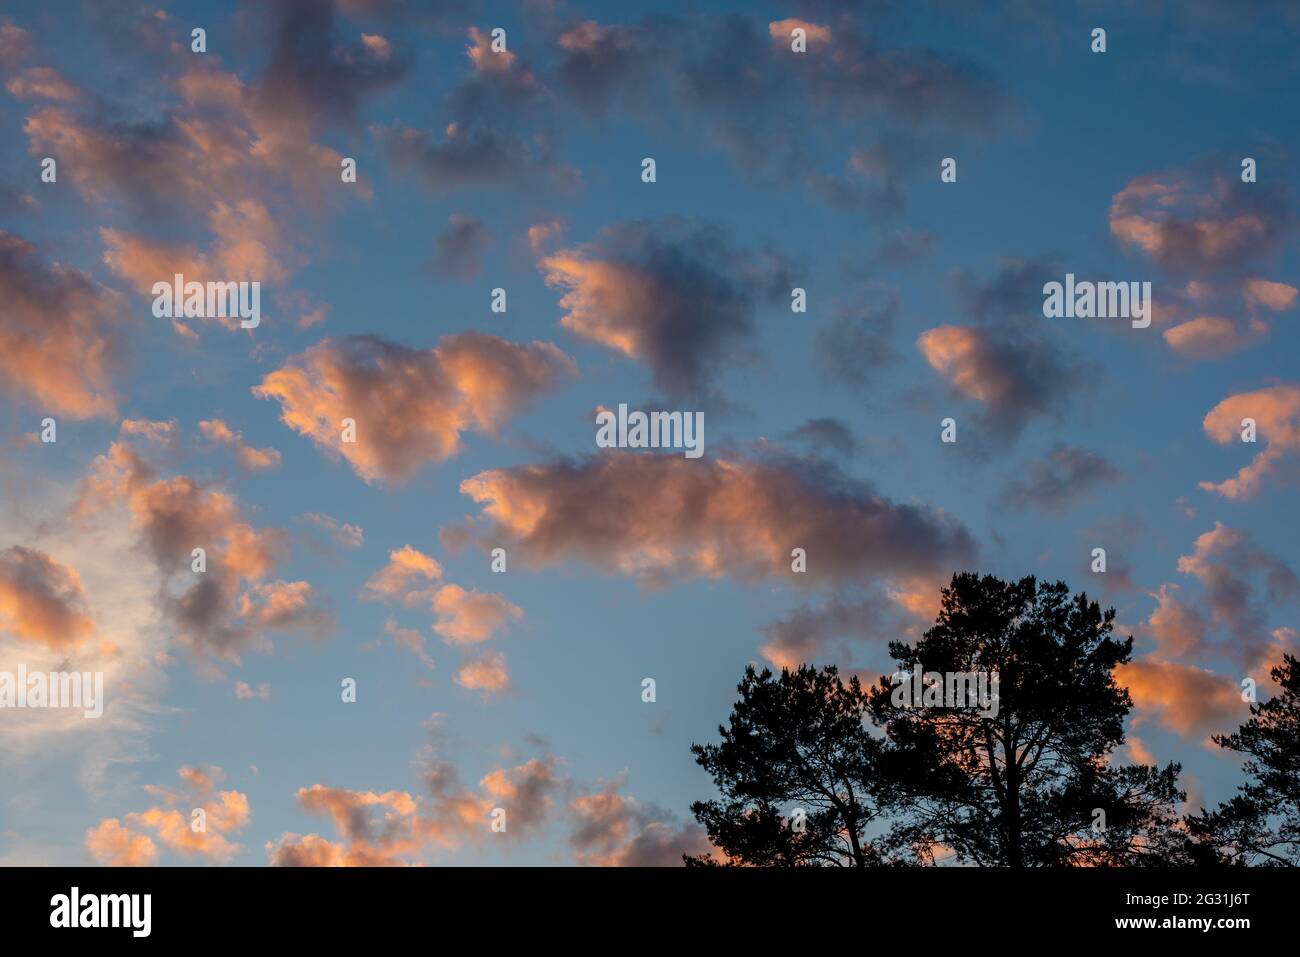 tropical sunrise cloudscape sky with pink black and white coloured cumulus cloud formation in a pastel blue sky. Sunset or sunrise background image Stock Photo